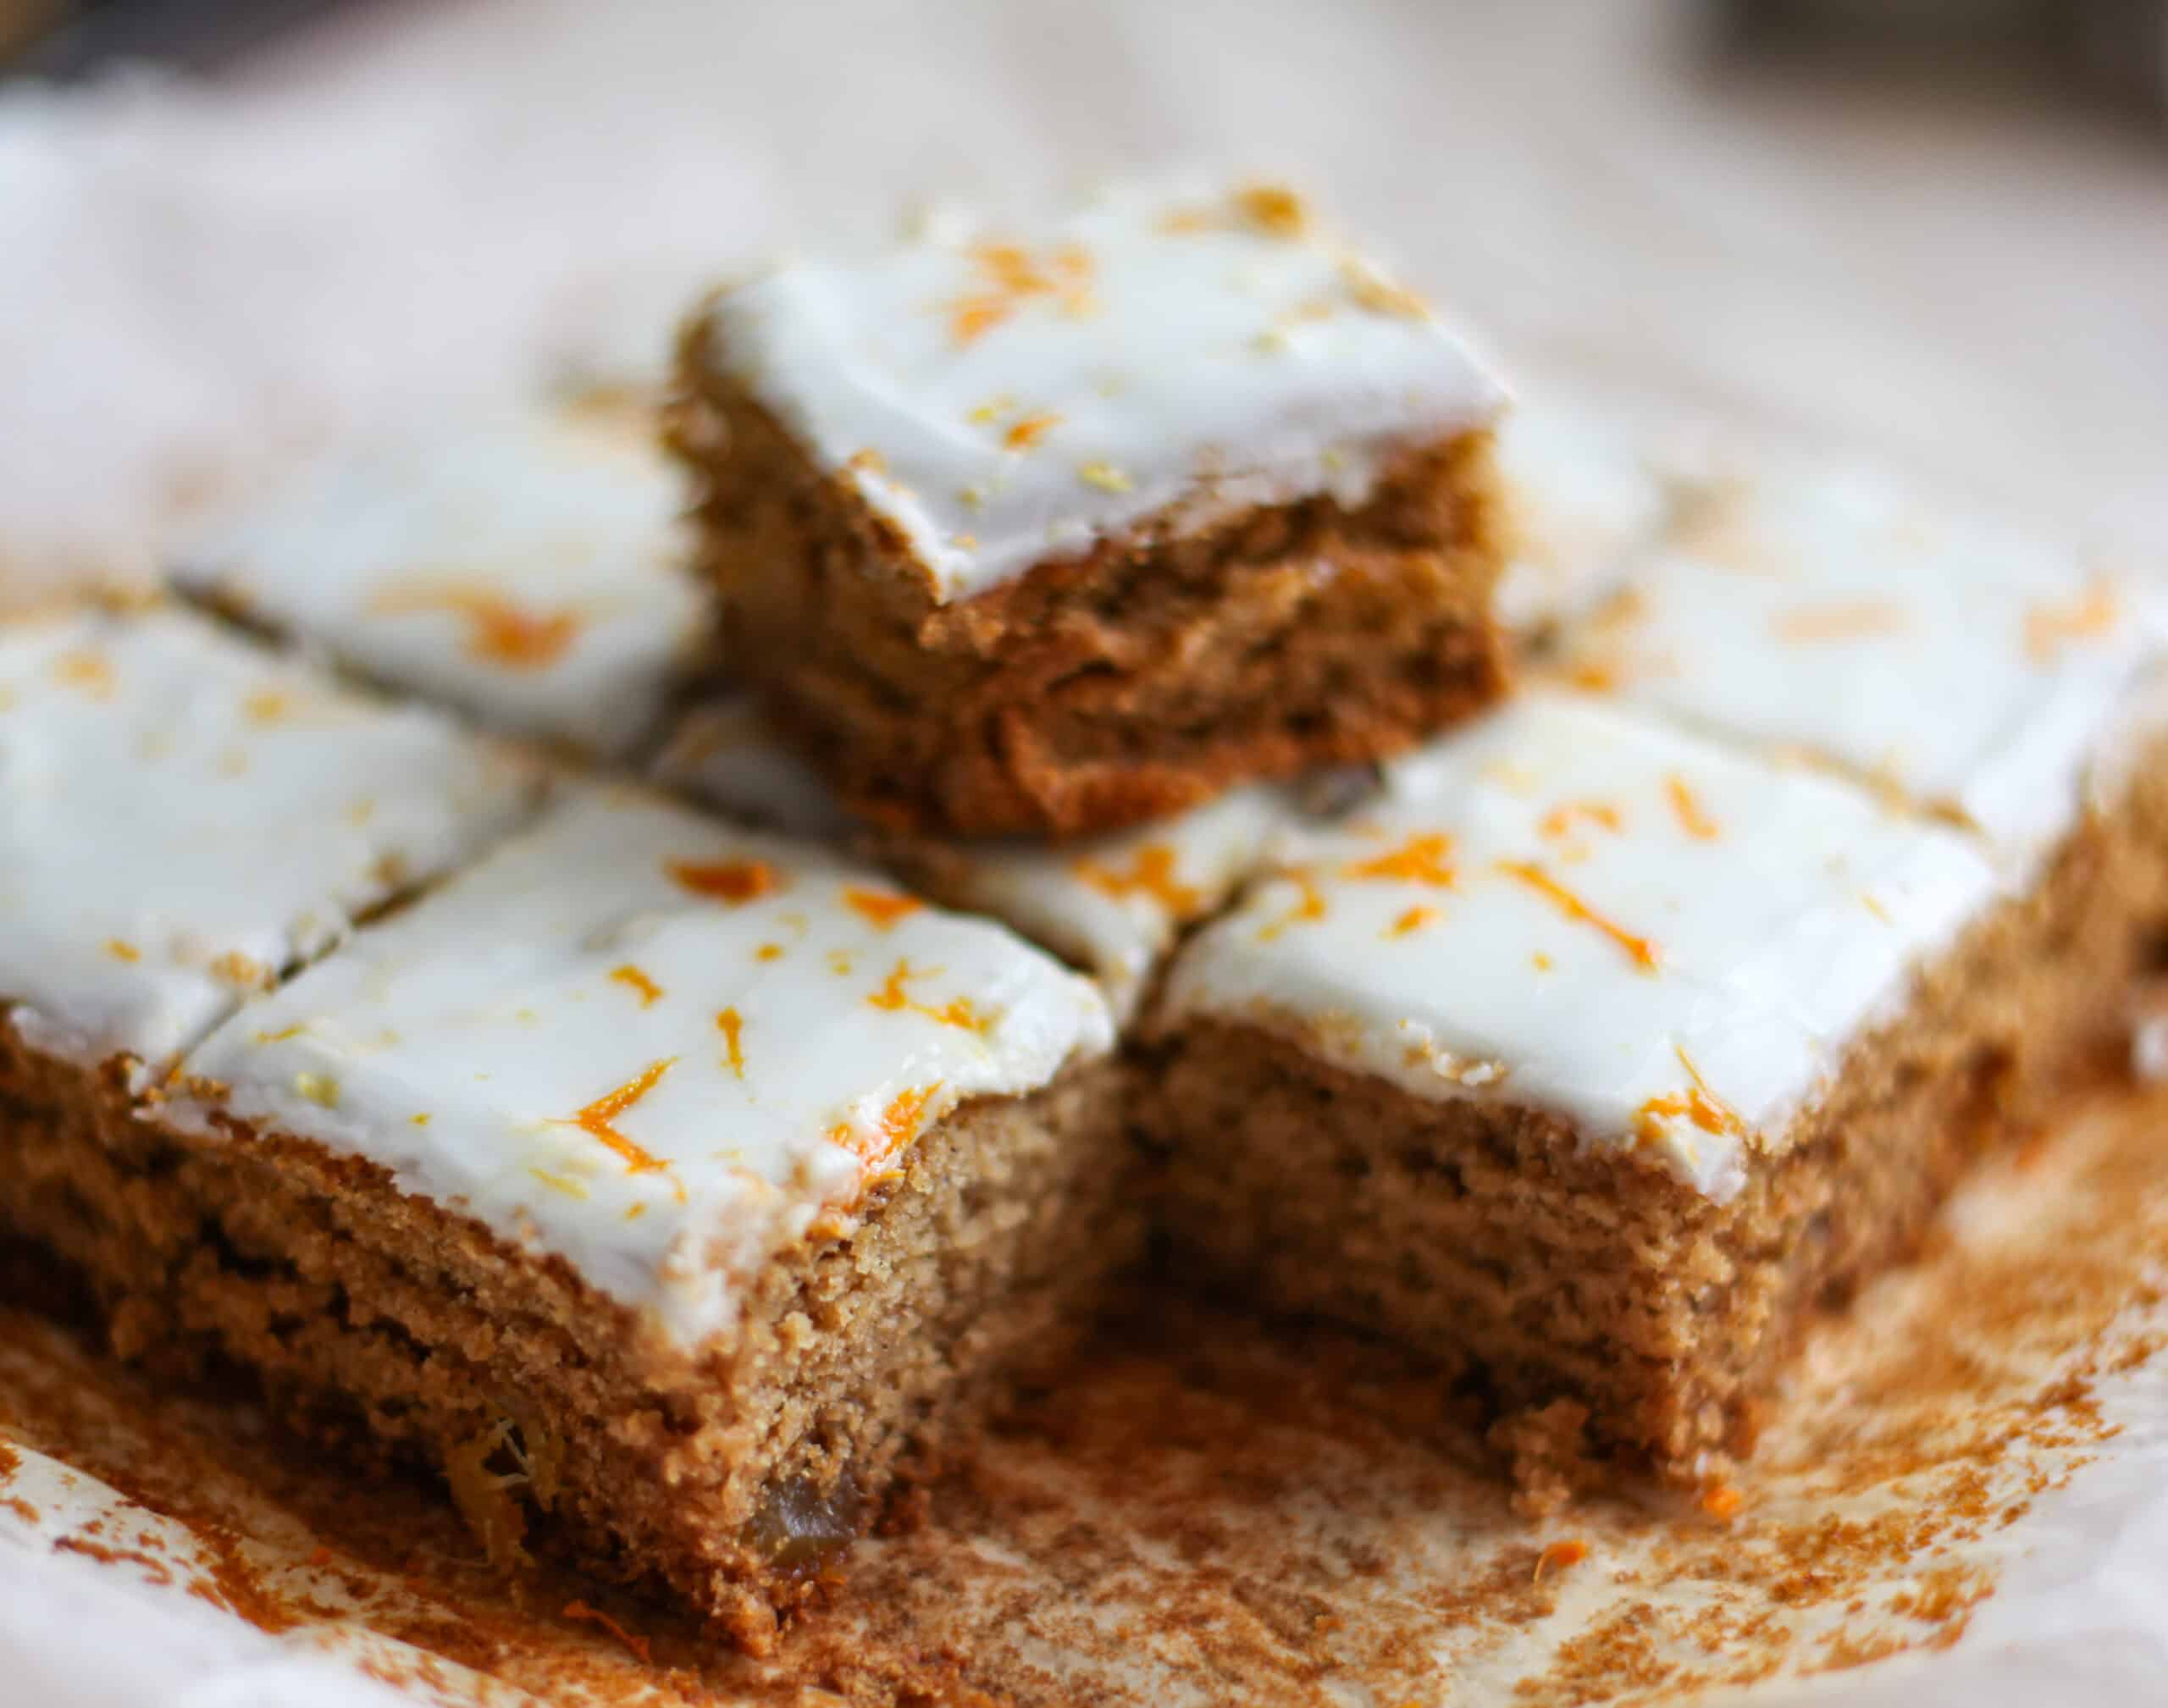 A plate of gingerbread cake, cut into squares.